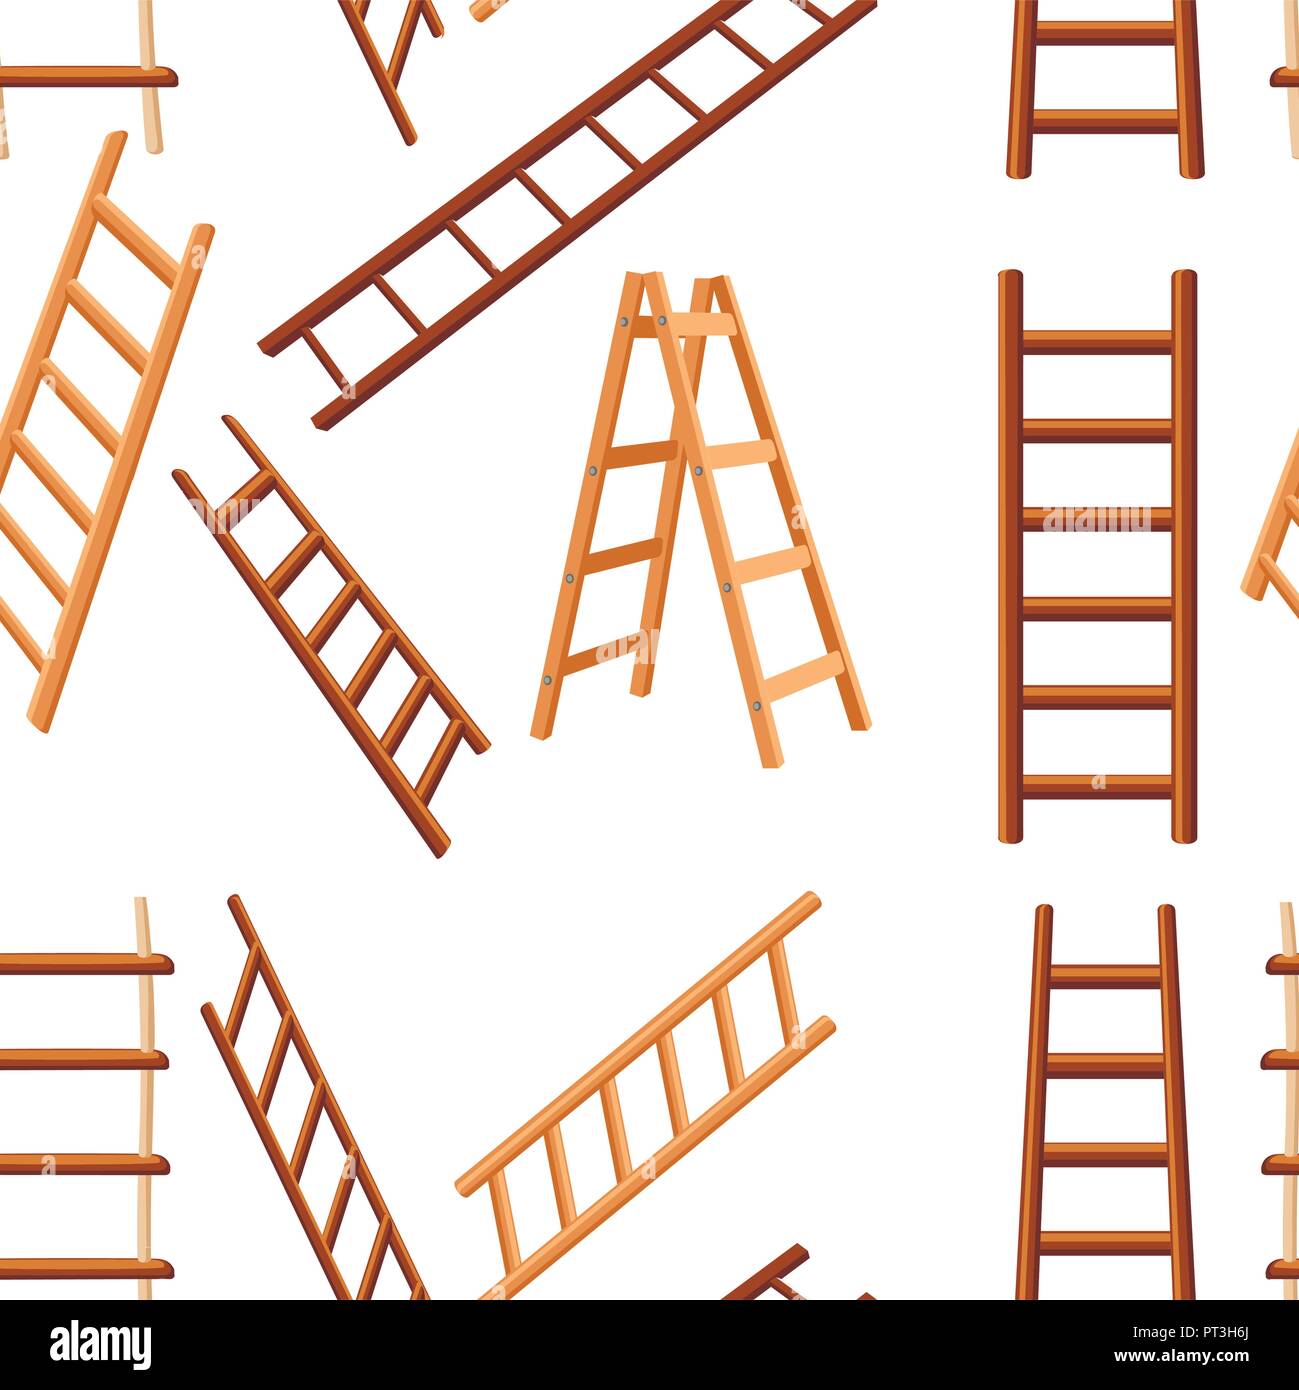 Seamless pattern. Collection of wooden ladders. Different types of stepladders. Flat vector illustration on white background. Stock Vector